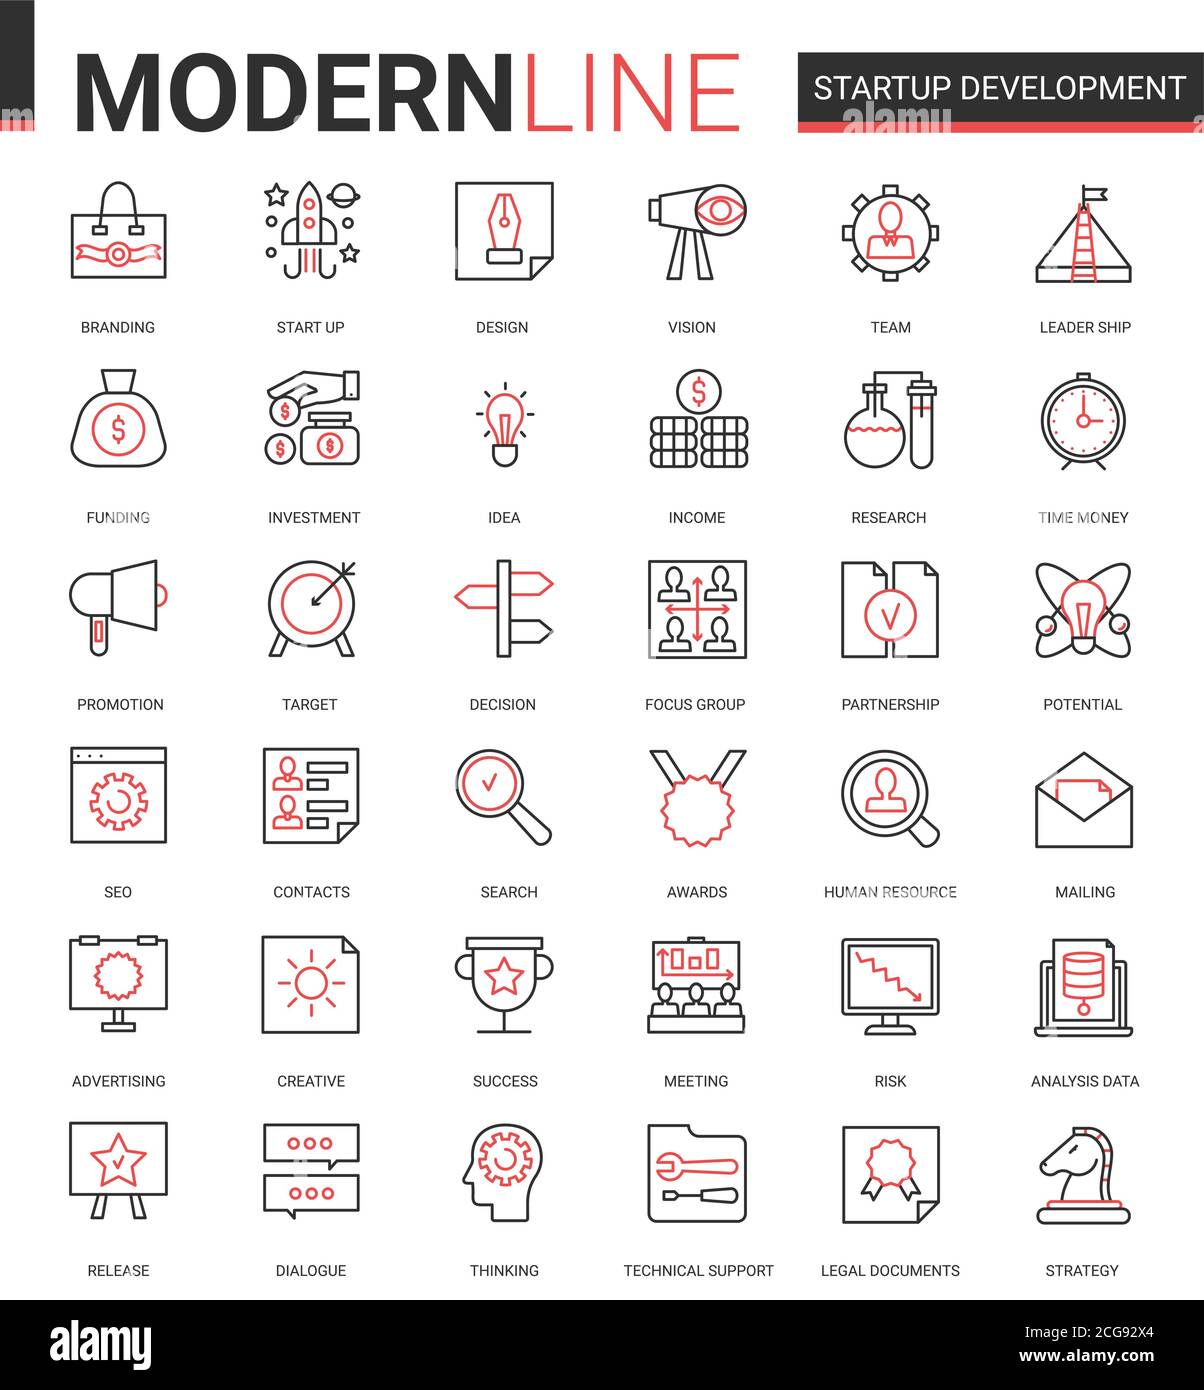 Business startup development technology thin red black line icon vector illustration set. Outline successful business strategy for starting new project symbols with developing innovation idea research Stock Vector